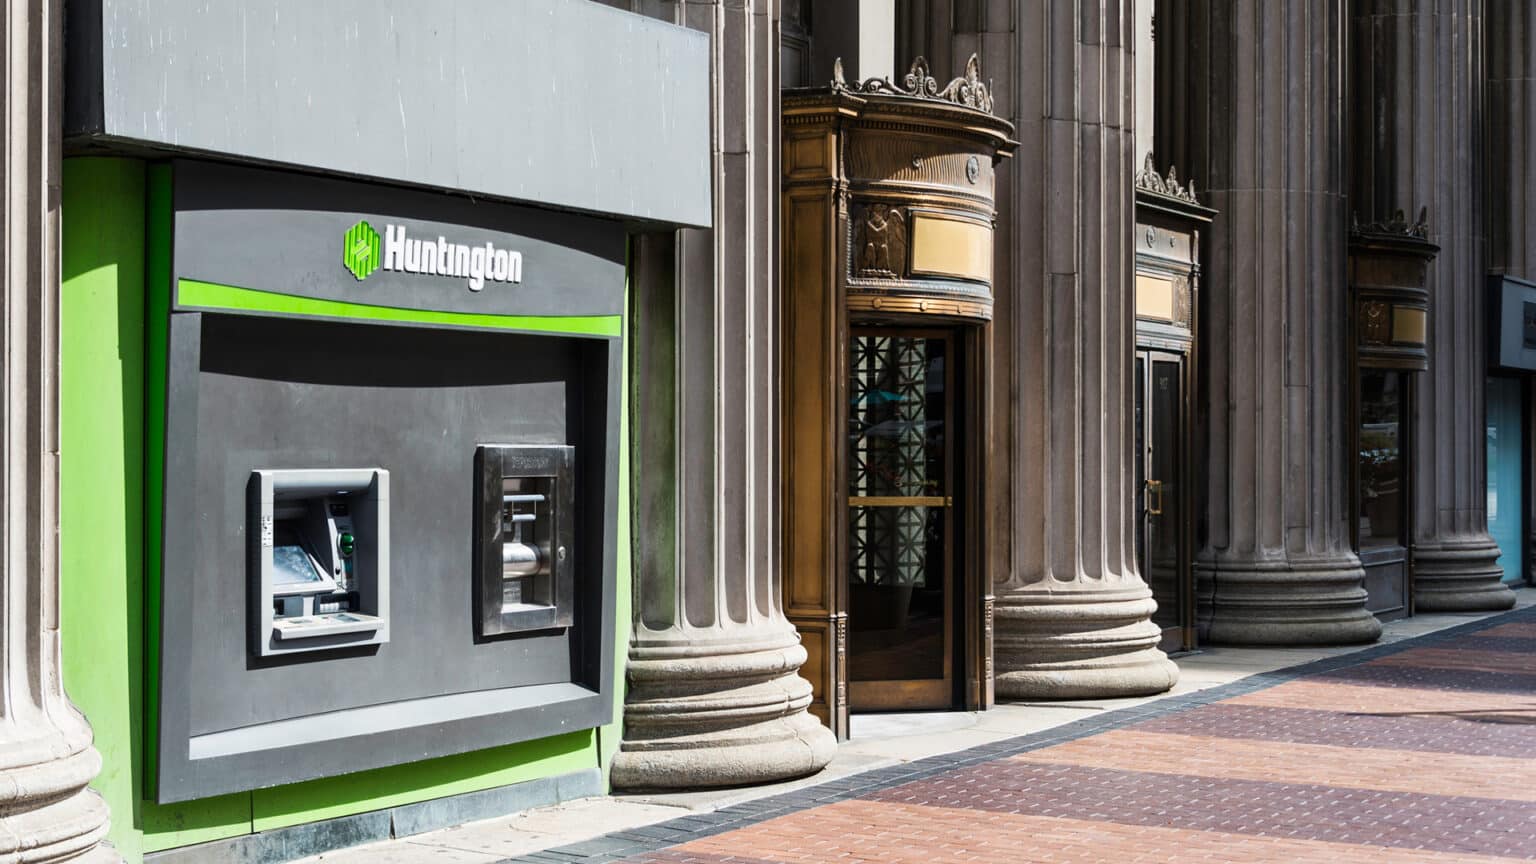 Huntington Bank Promotions Up to 600 in Cash Bonuses